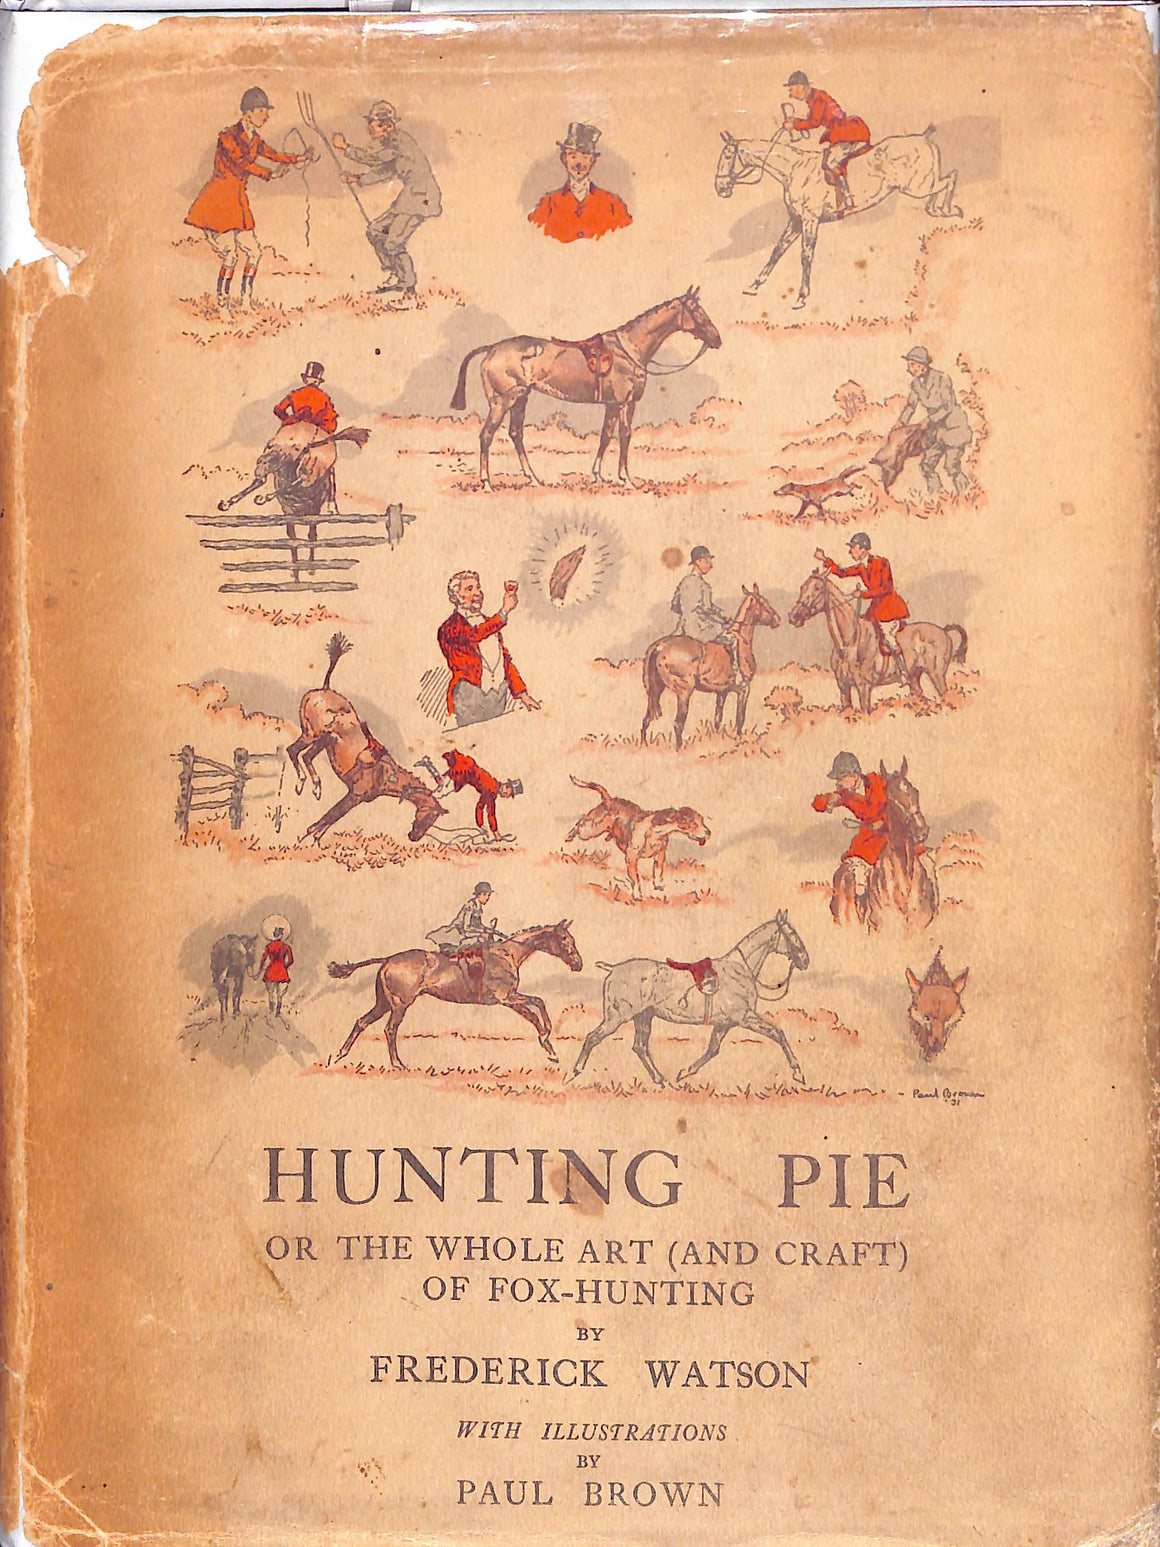 "Hunting Pie: Or The Whole (And Craft) Of Fox-Hunting" 1931 WATSON, Frederick (SOLD)